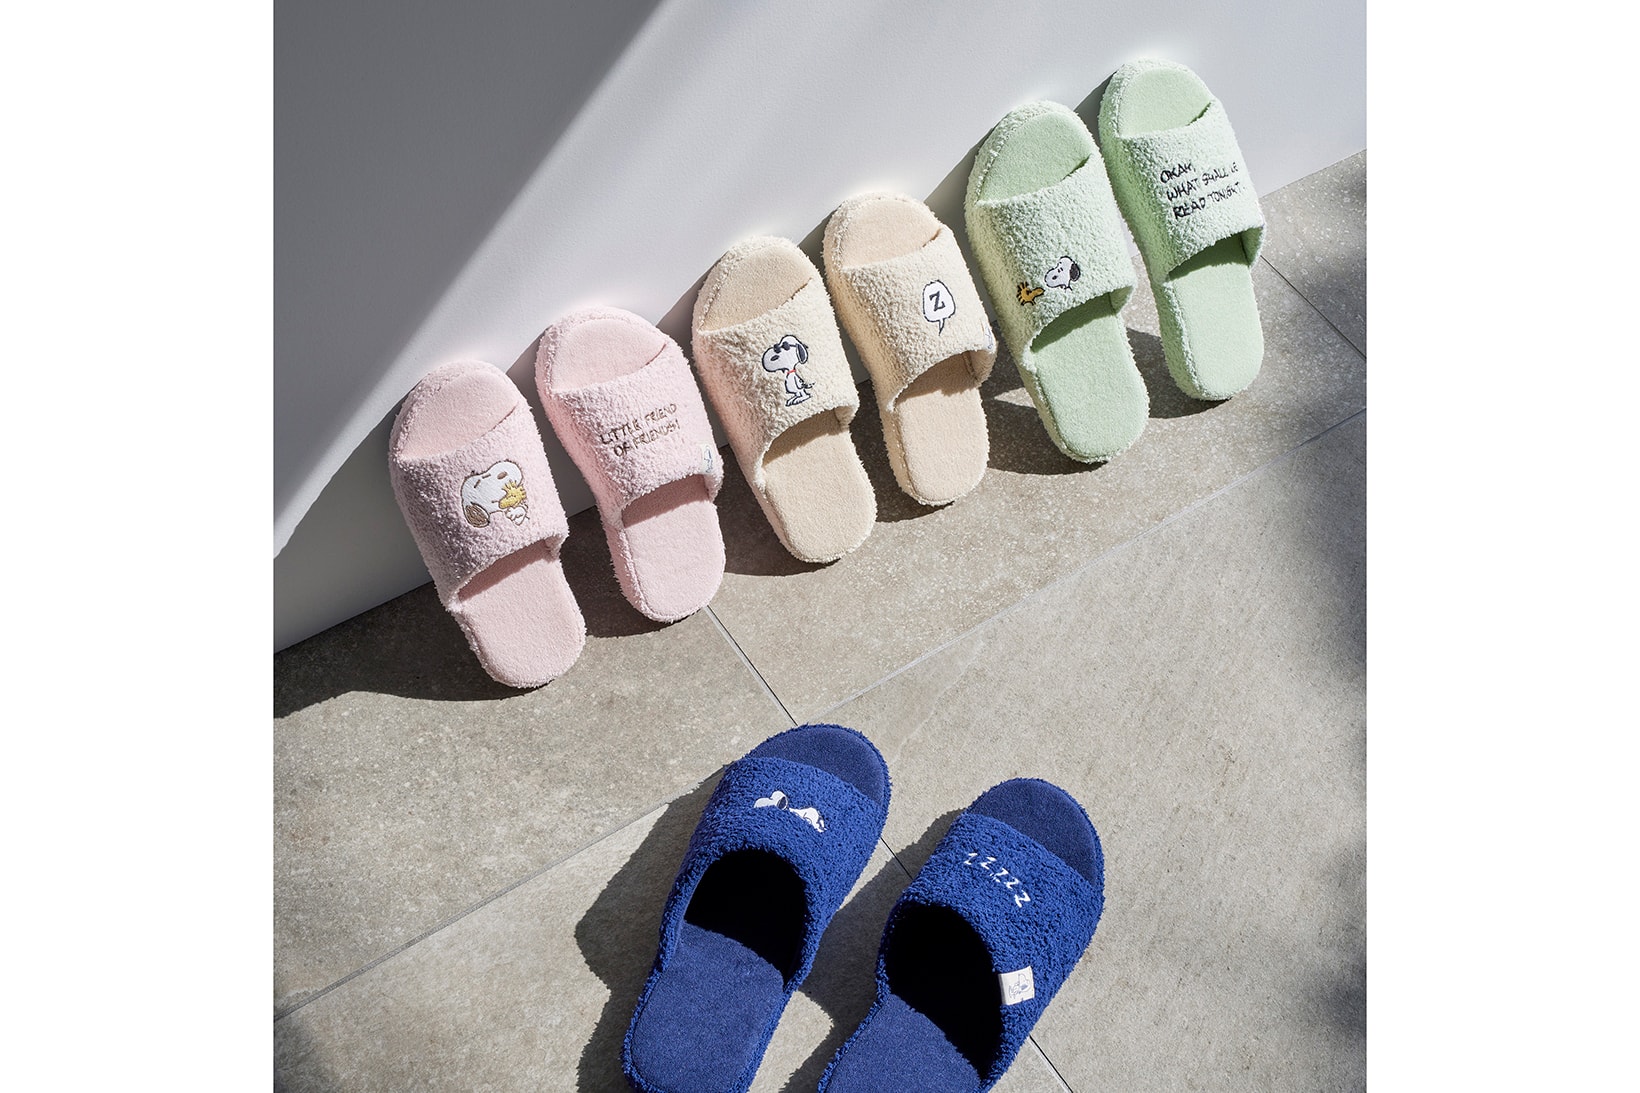 Peanuts UNIQLO Loungewear Collection Slippers